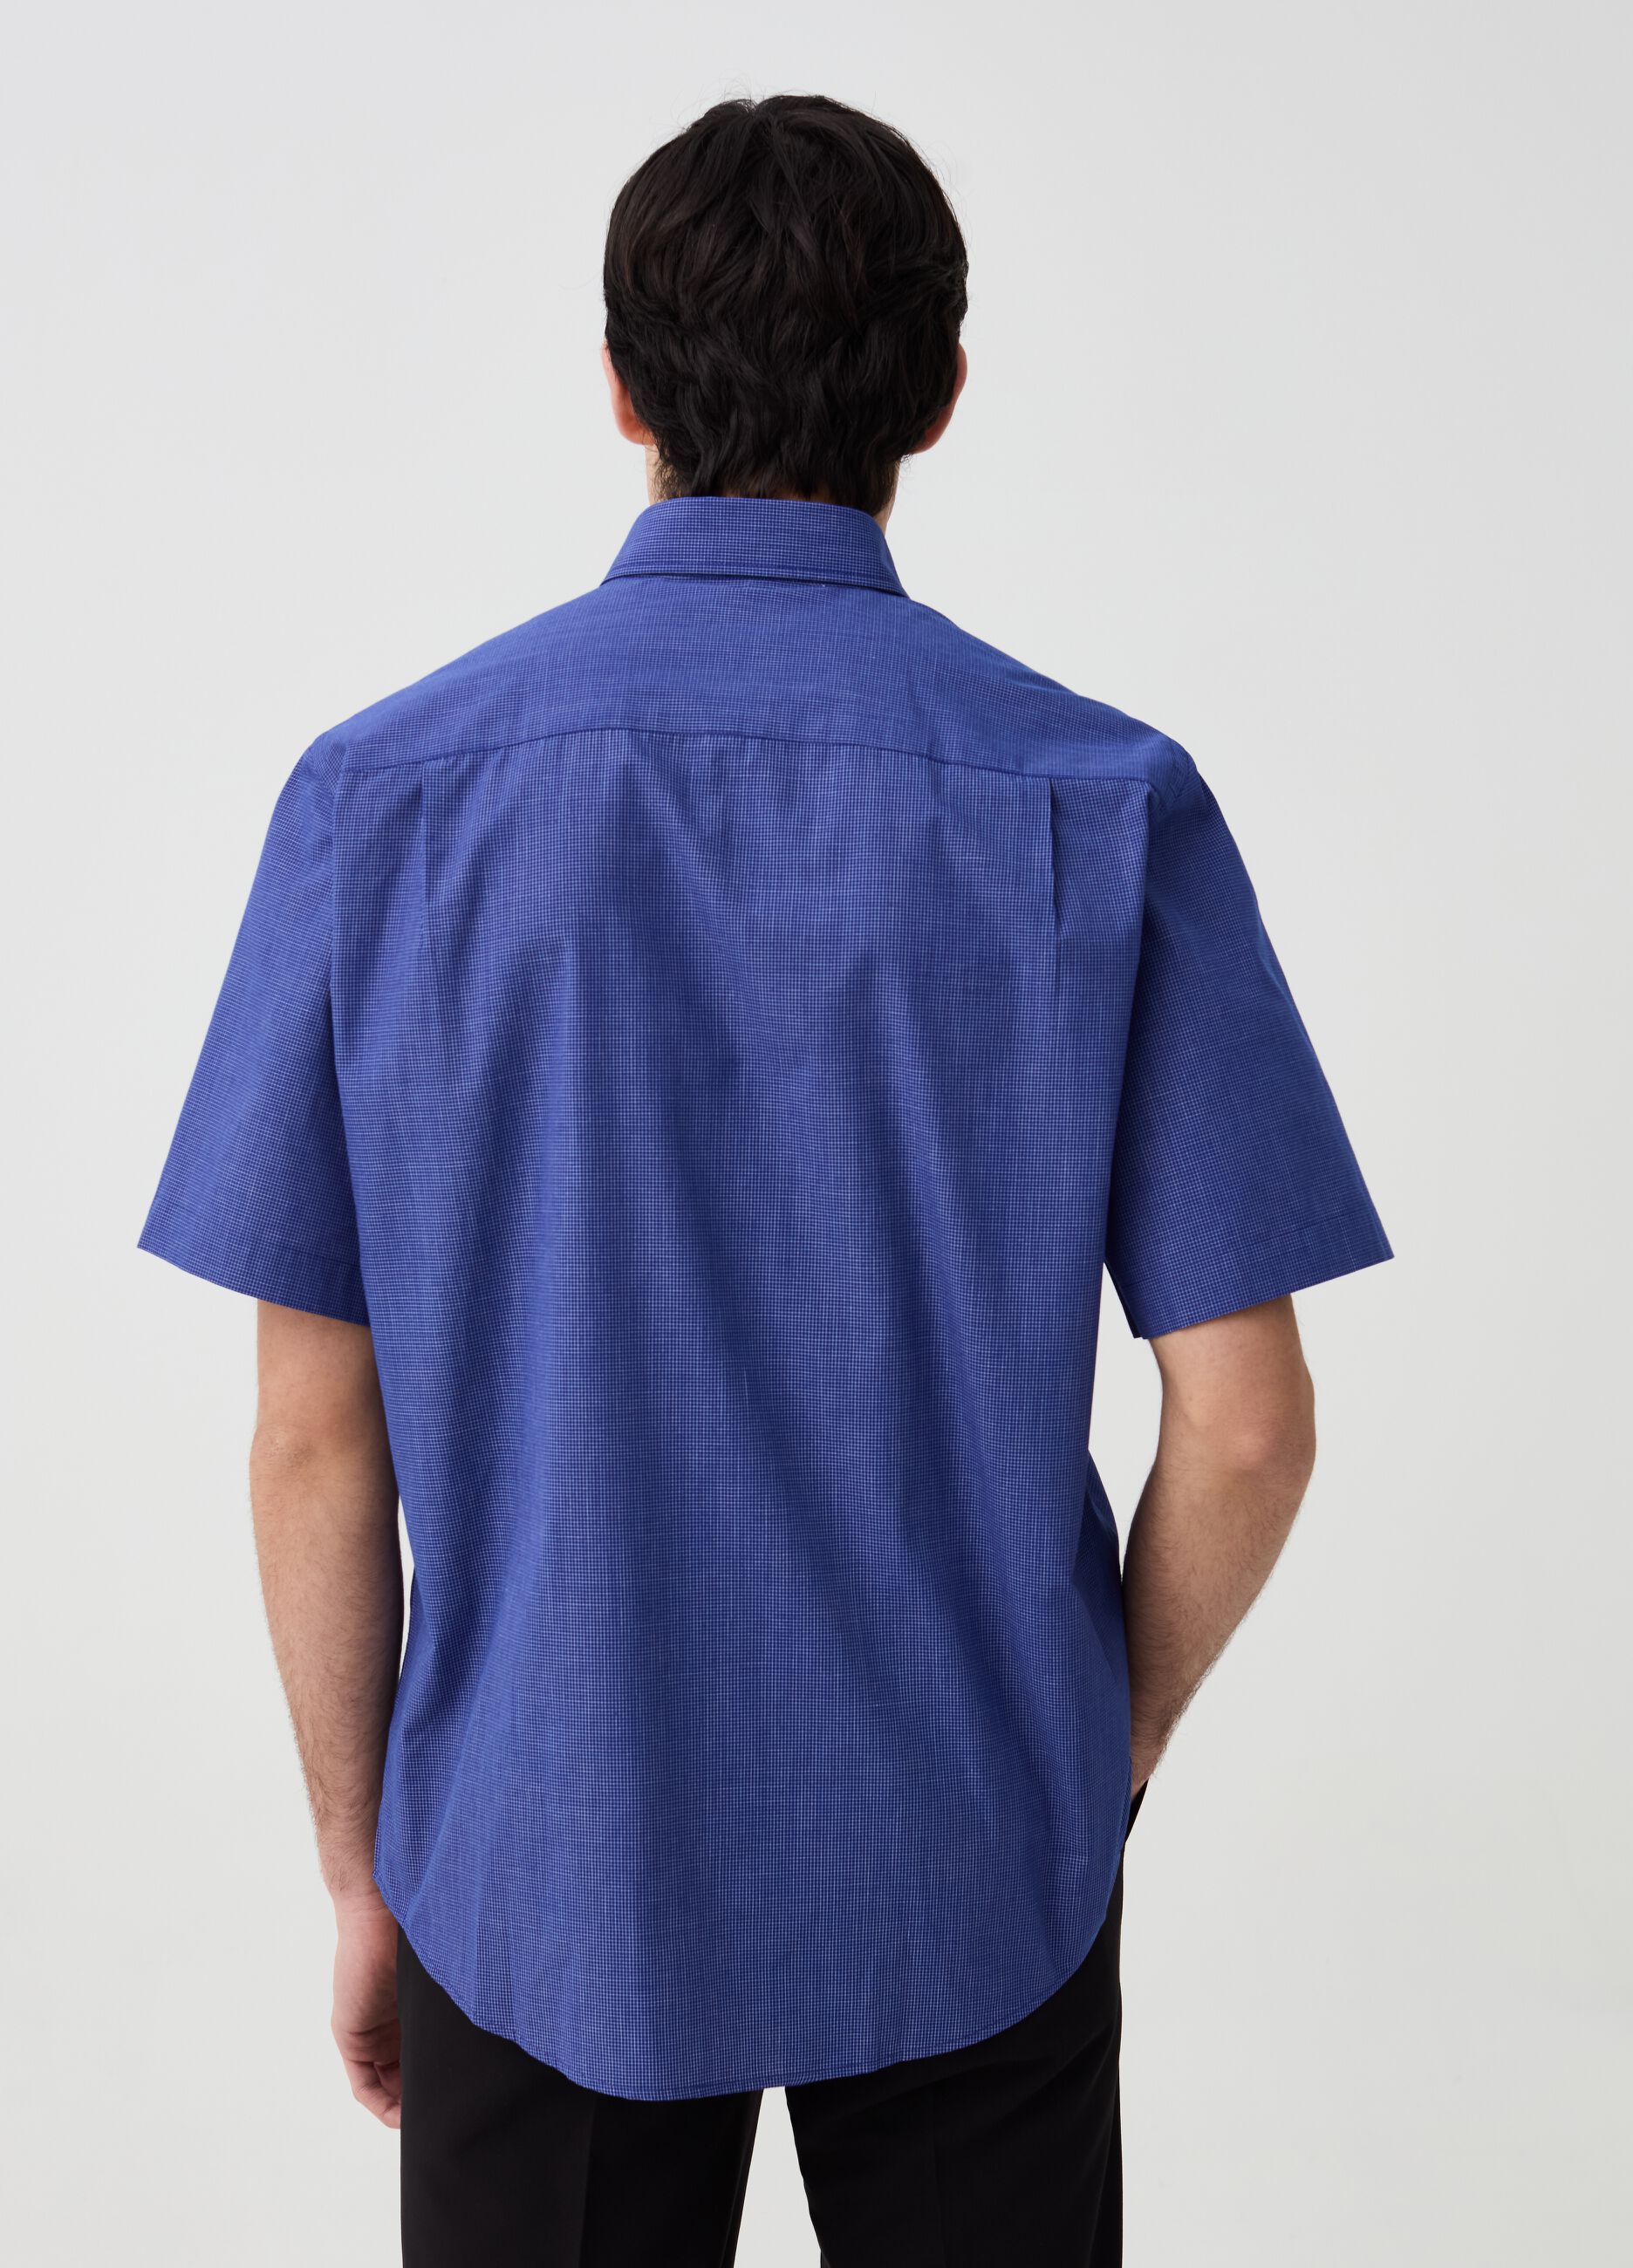 Short-sleeved shirt with micro pattern